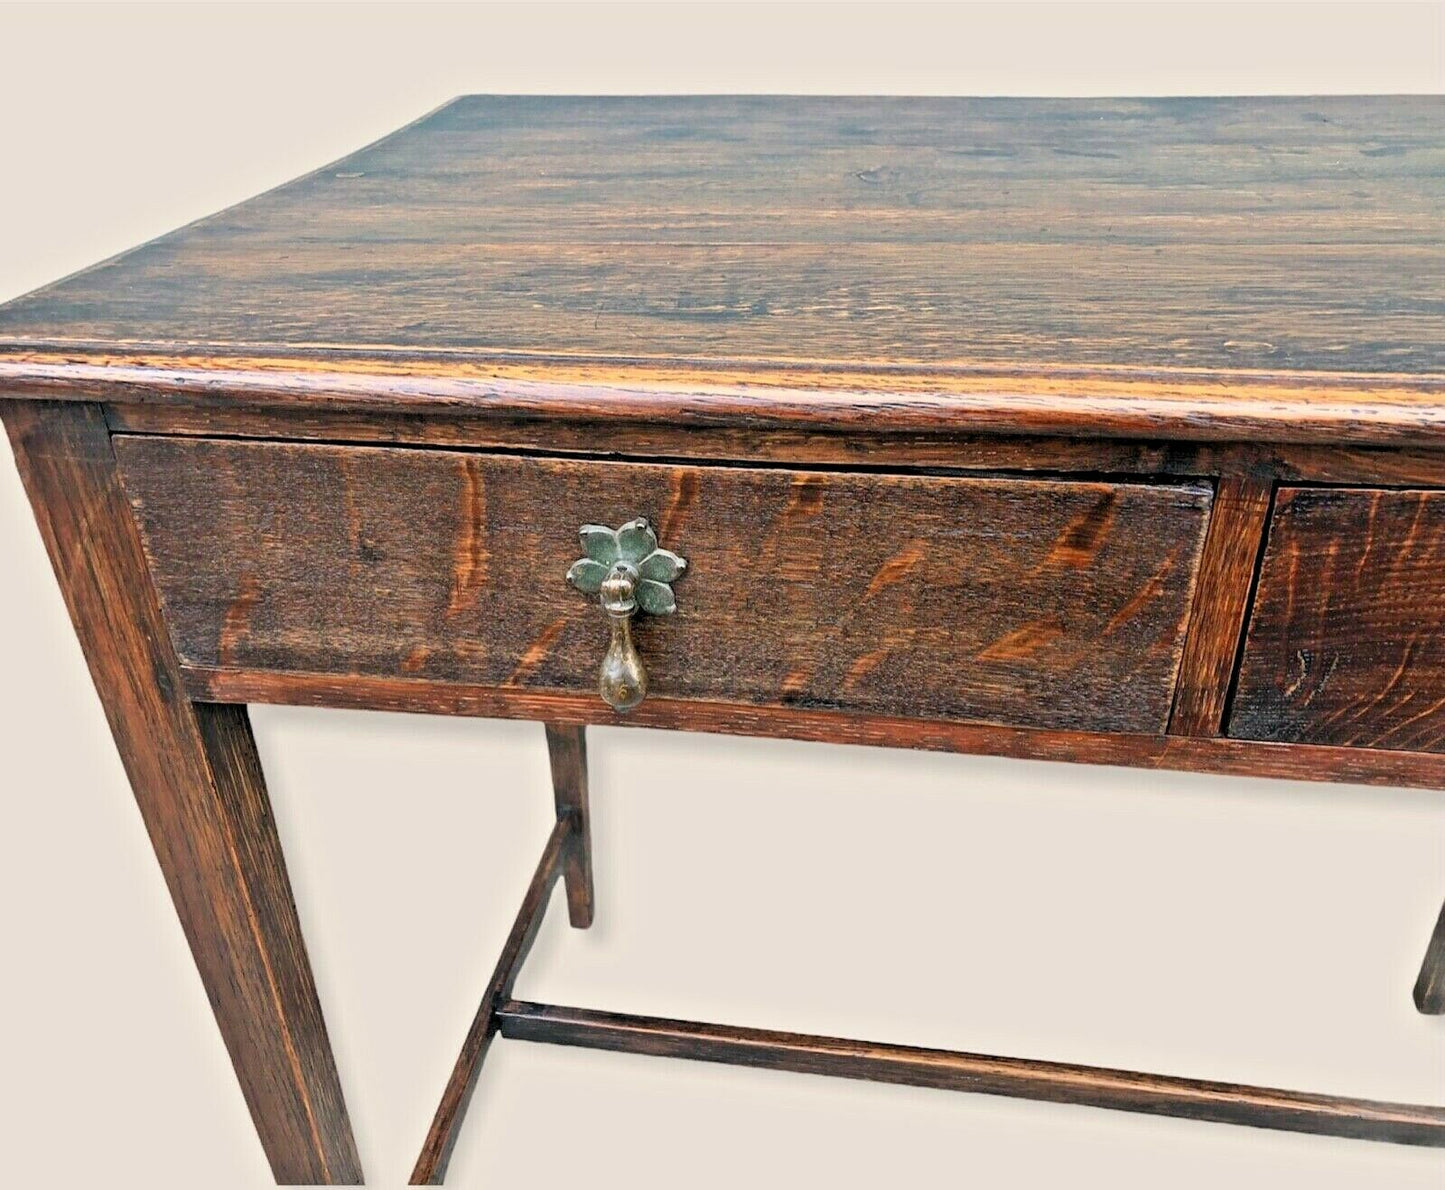 Antique Oak Side Table 18th Century ( SOLD )